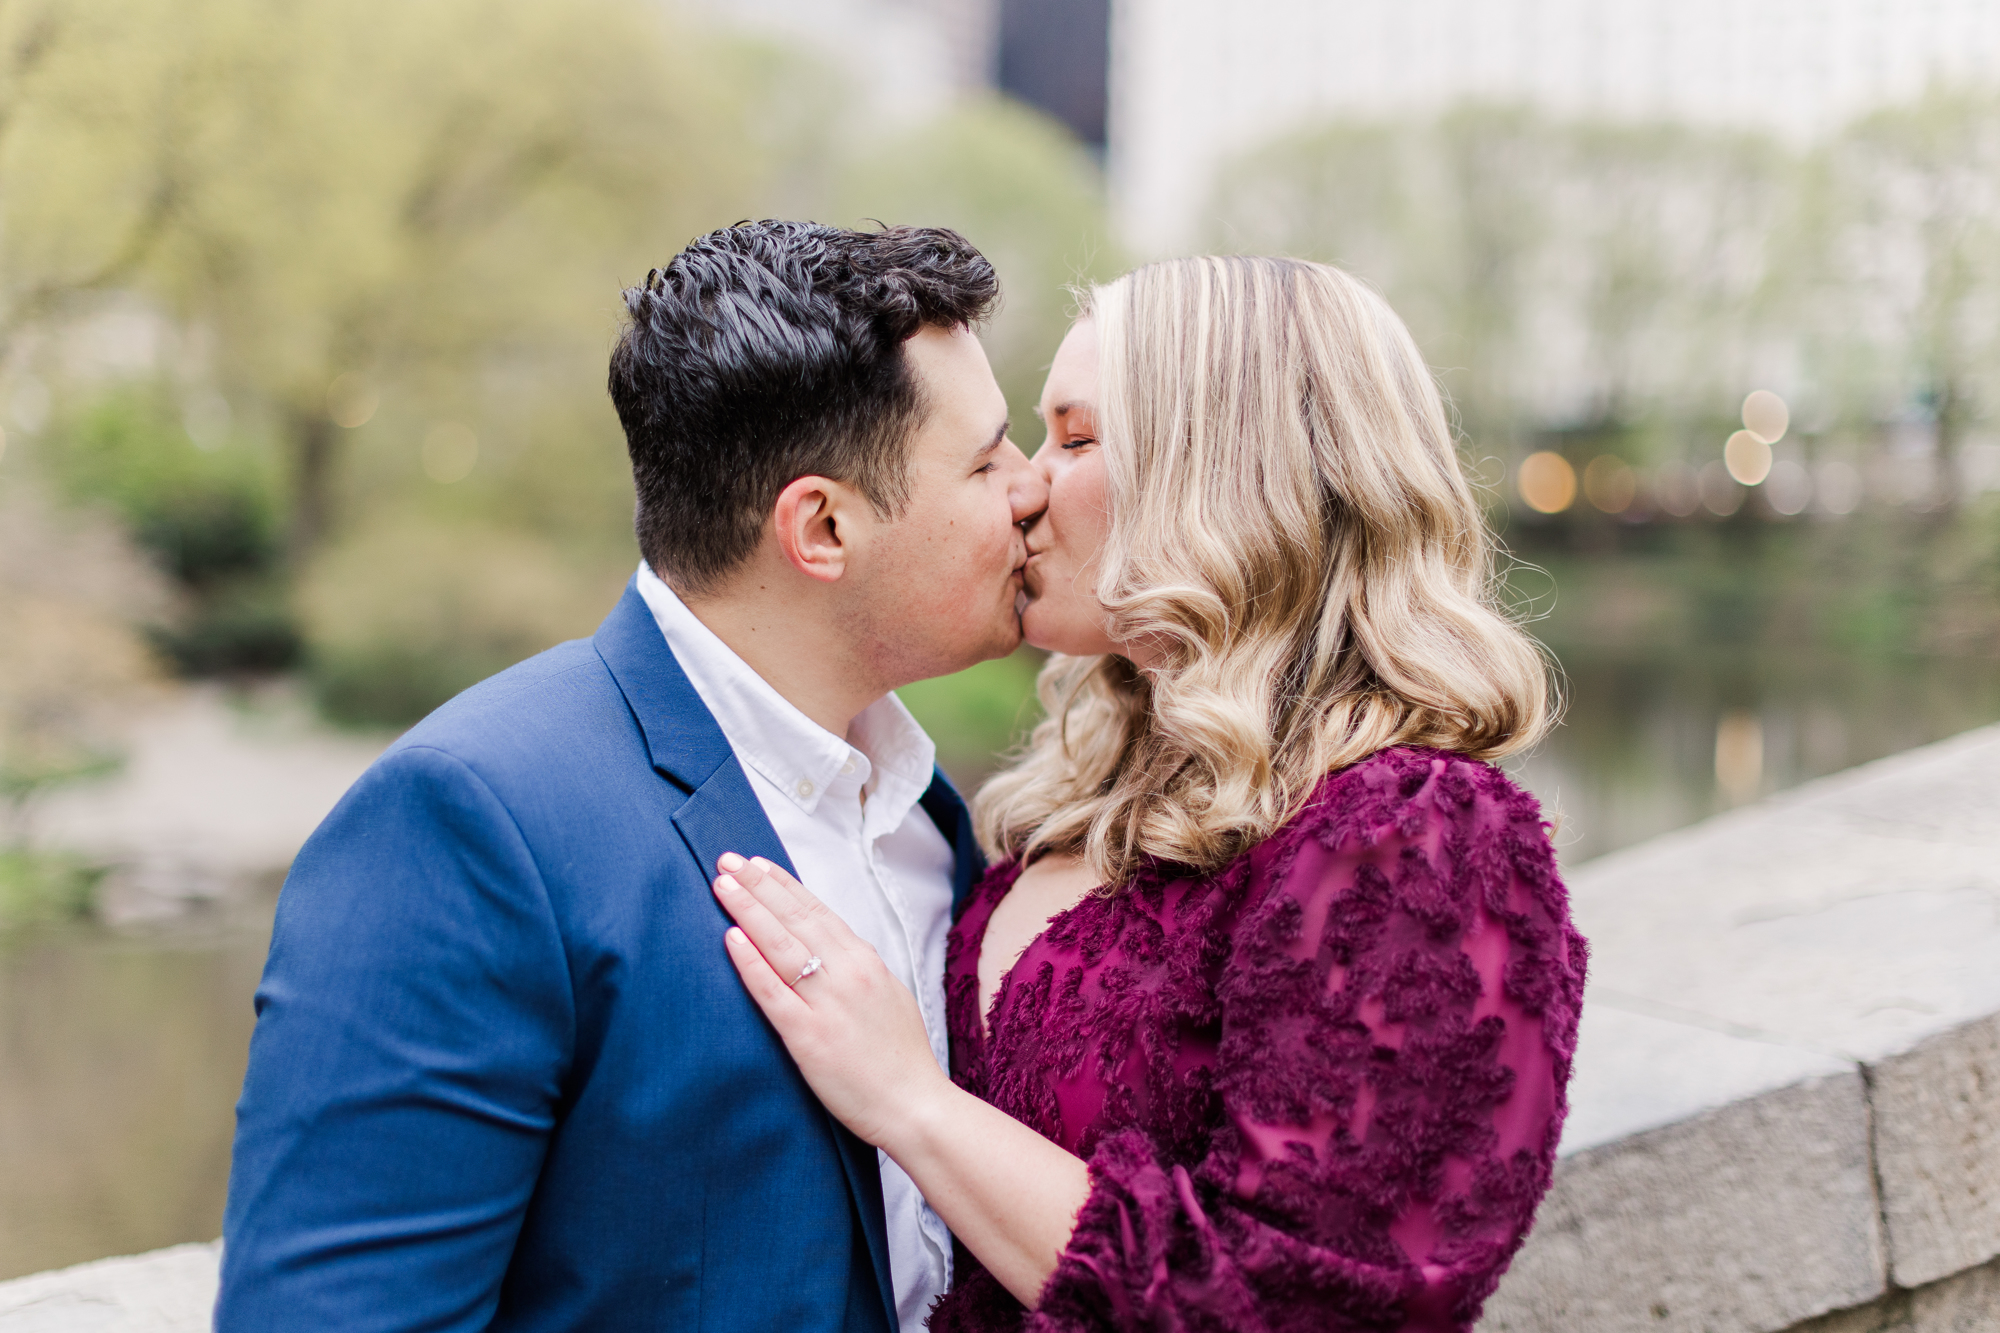 Awesome Engagement Pictures in Central Park